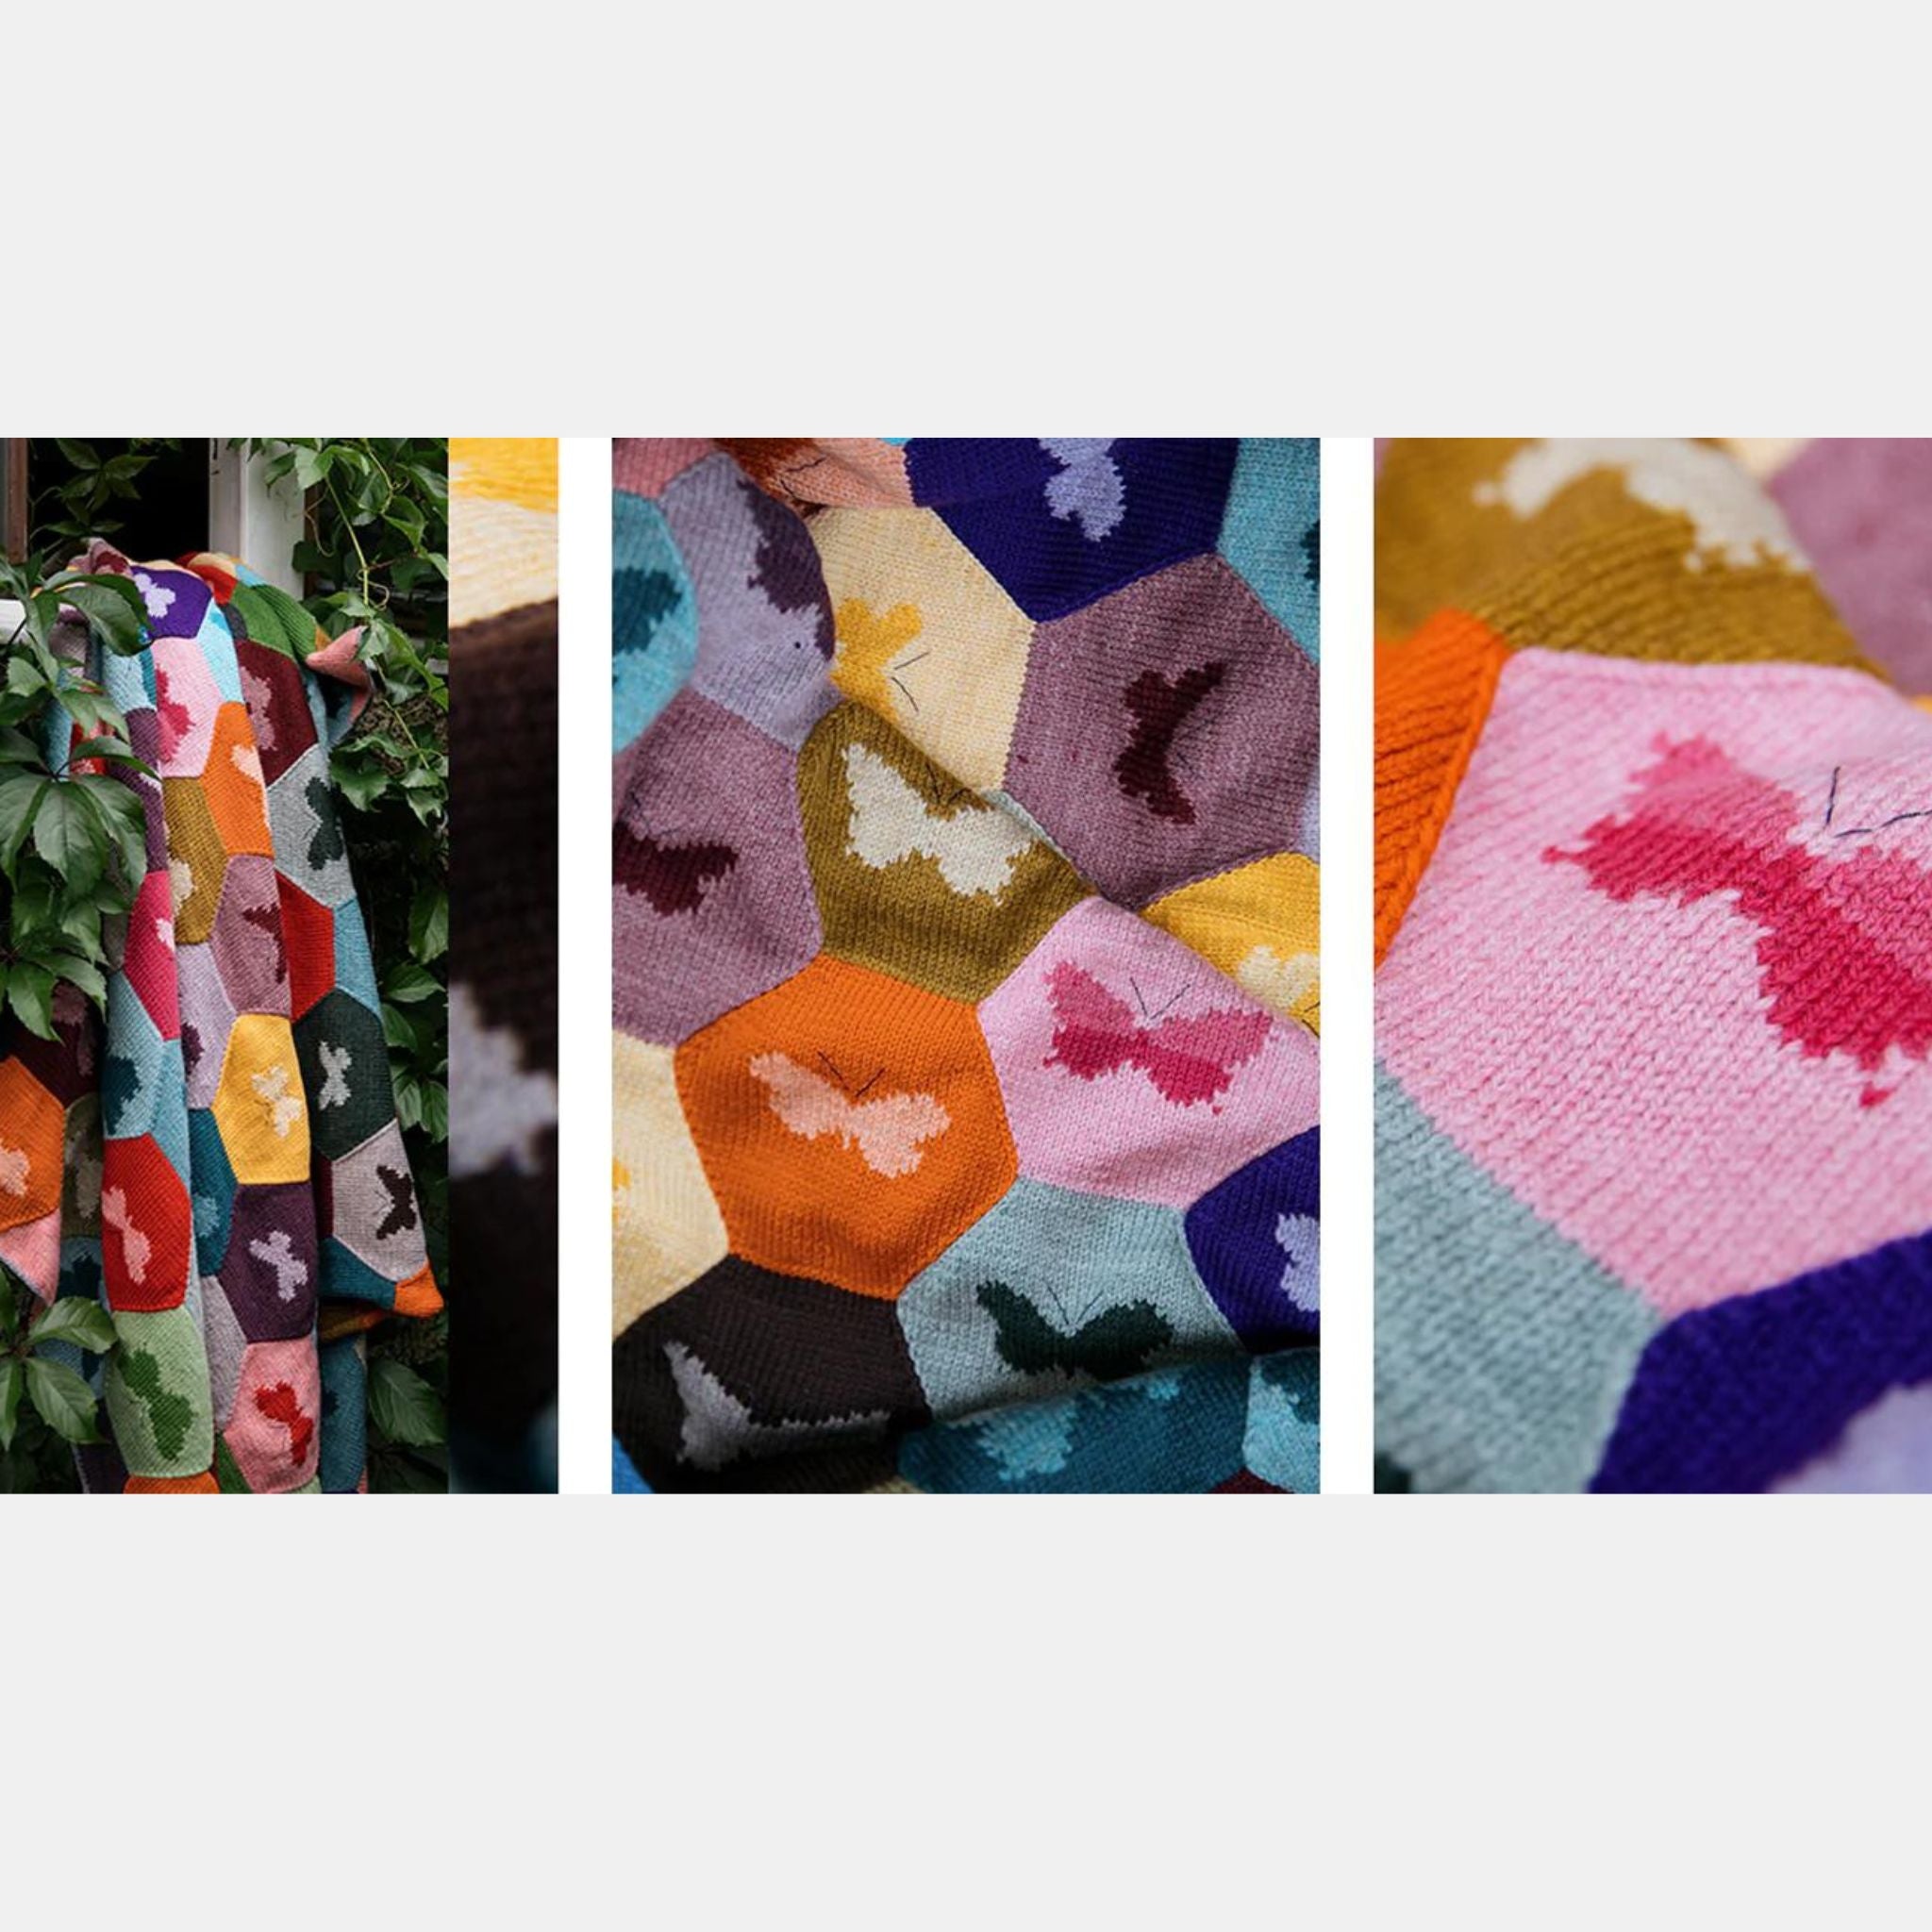 The Knitted Fabric by Dee Hardwicke Patchwork Butterfly